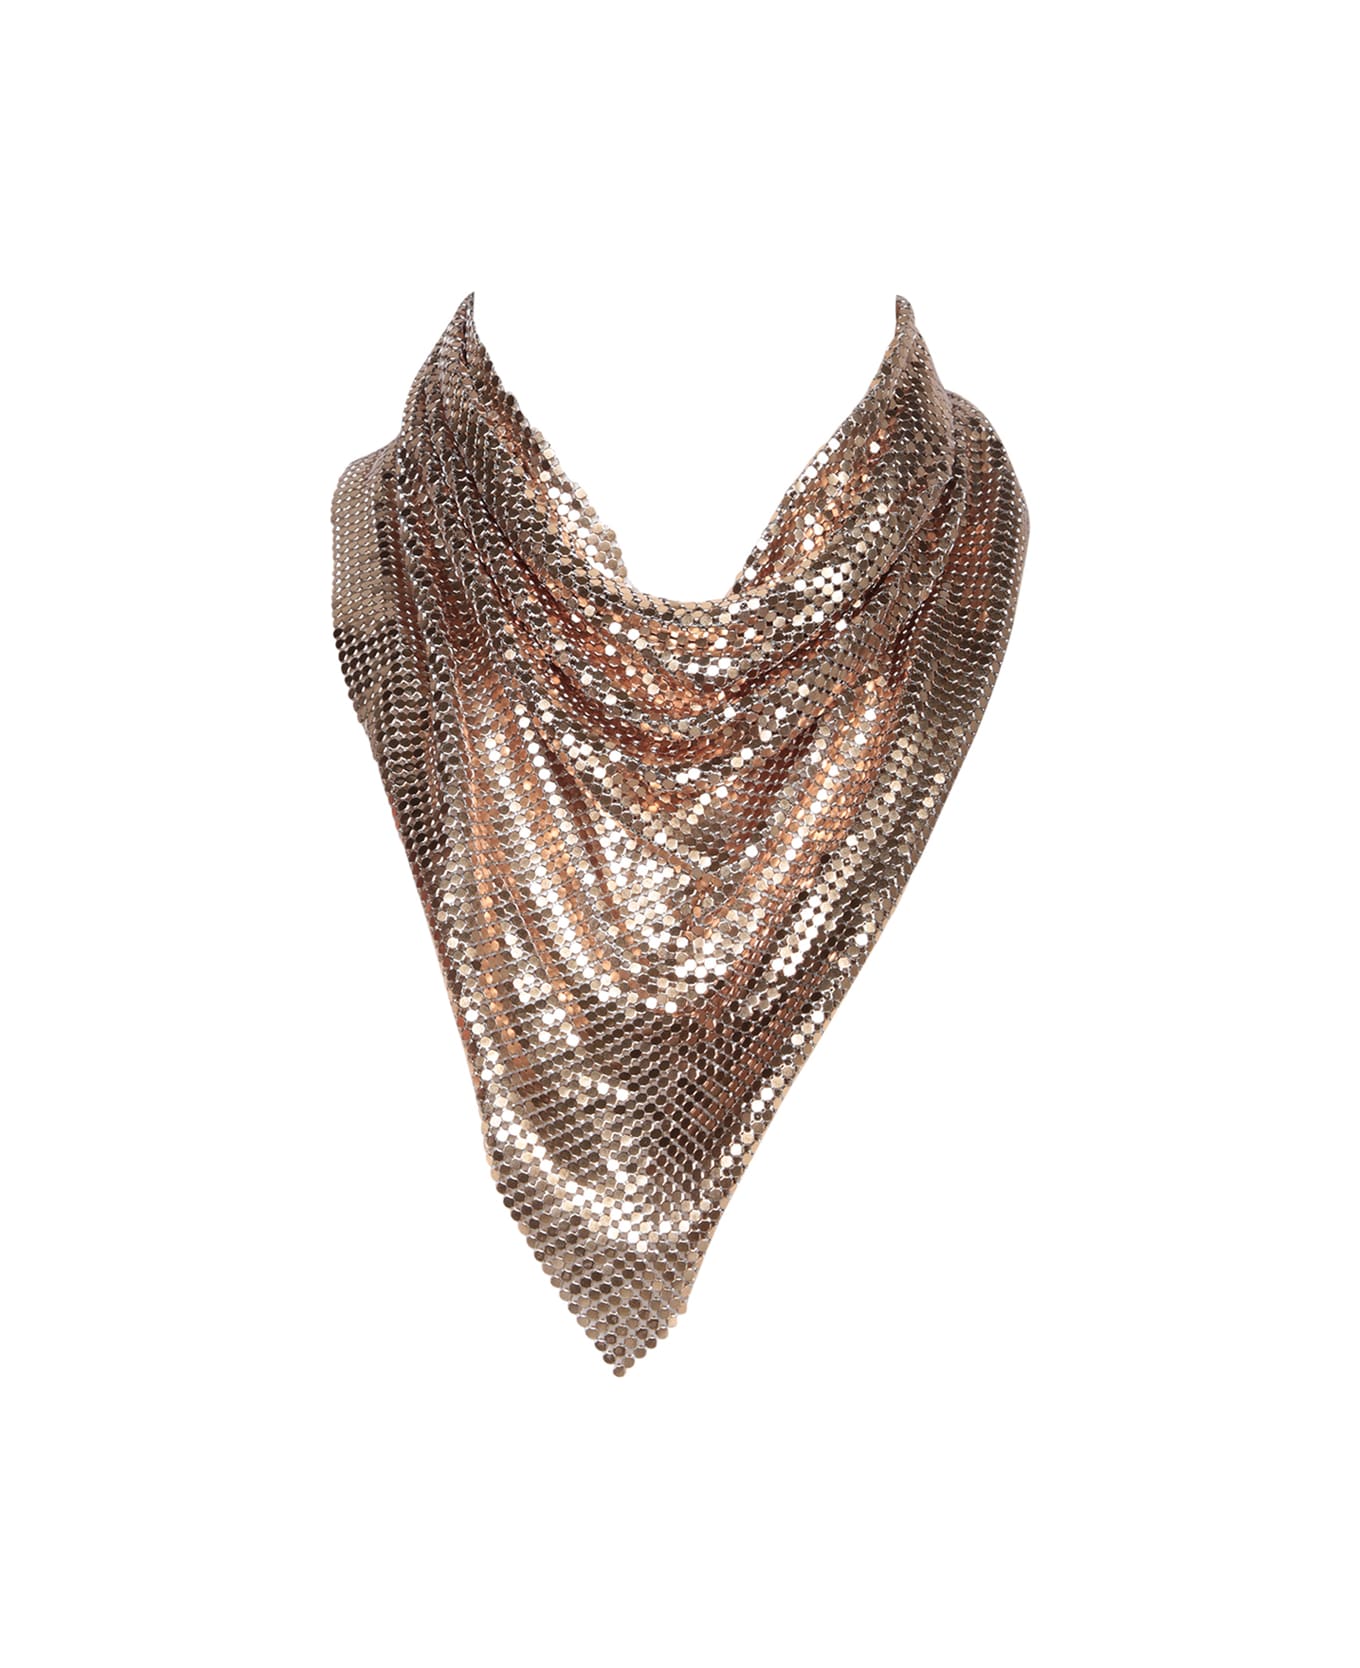 Paco Rabanne Gold Pixel Scarf Necklace - Gold ジュエリー